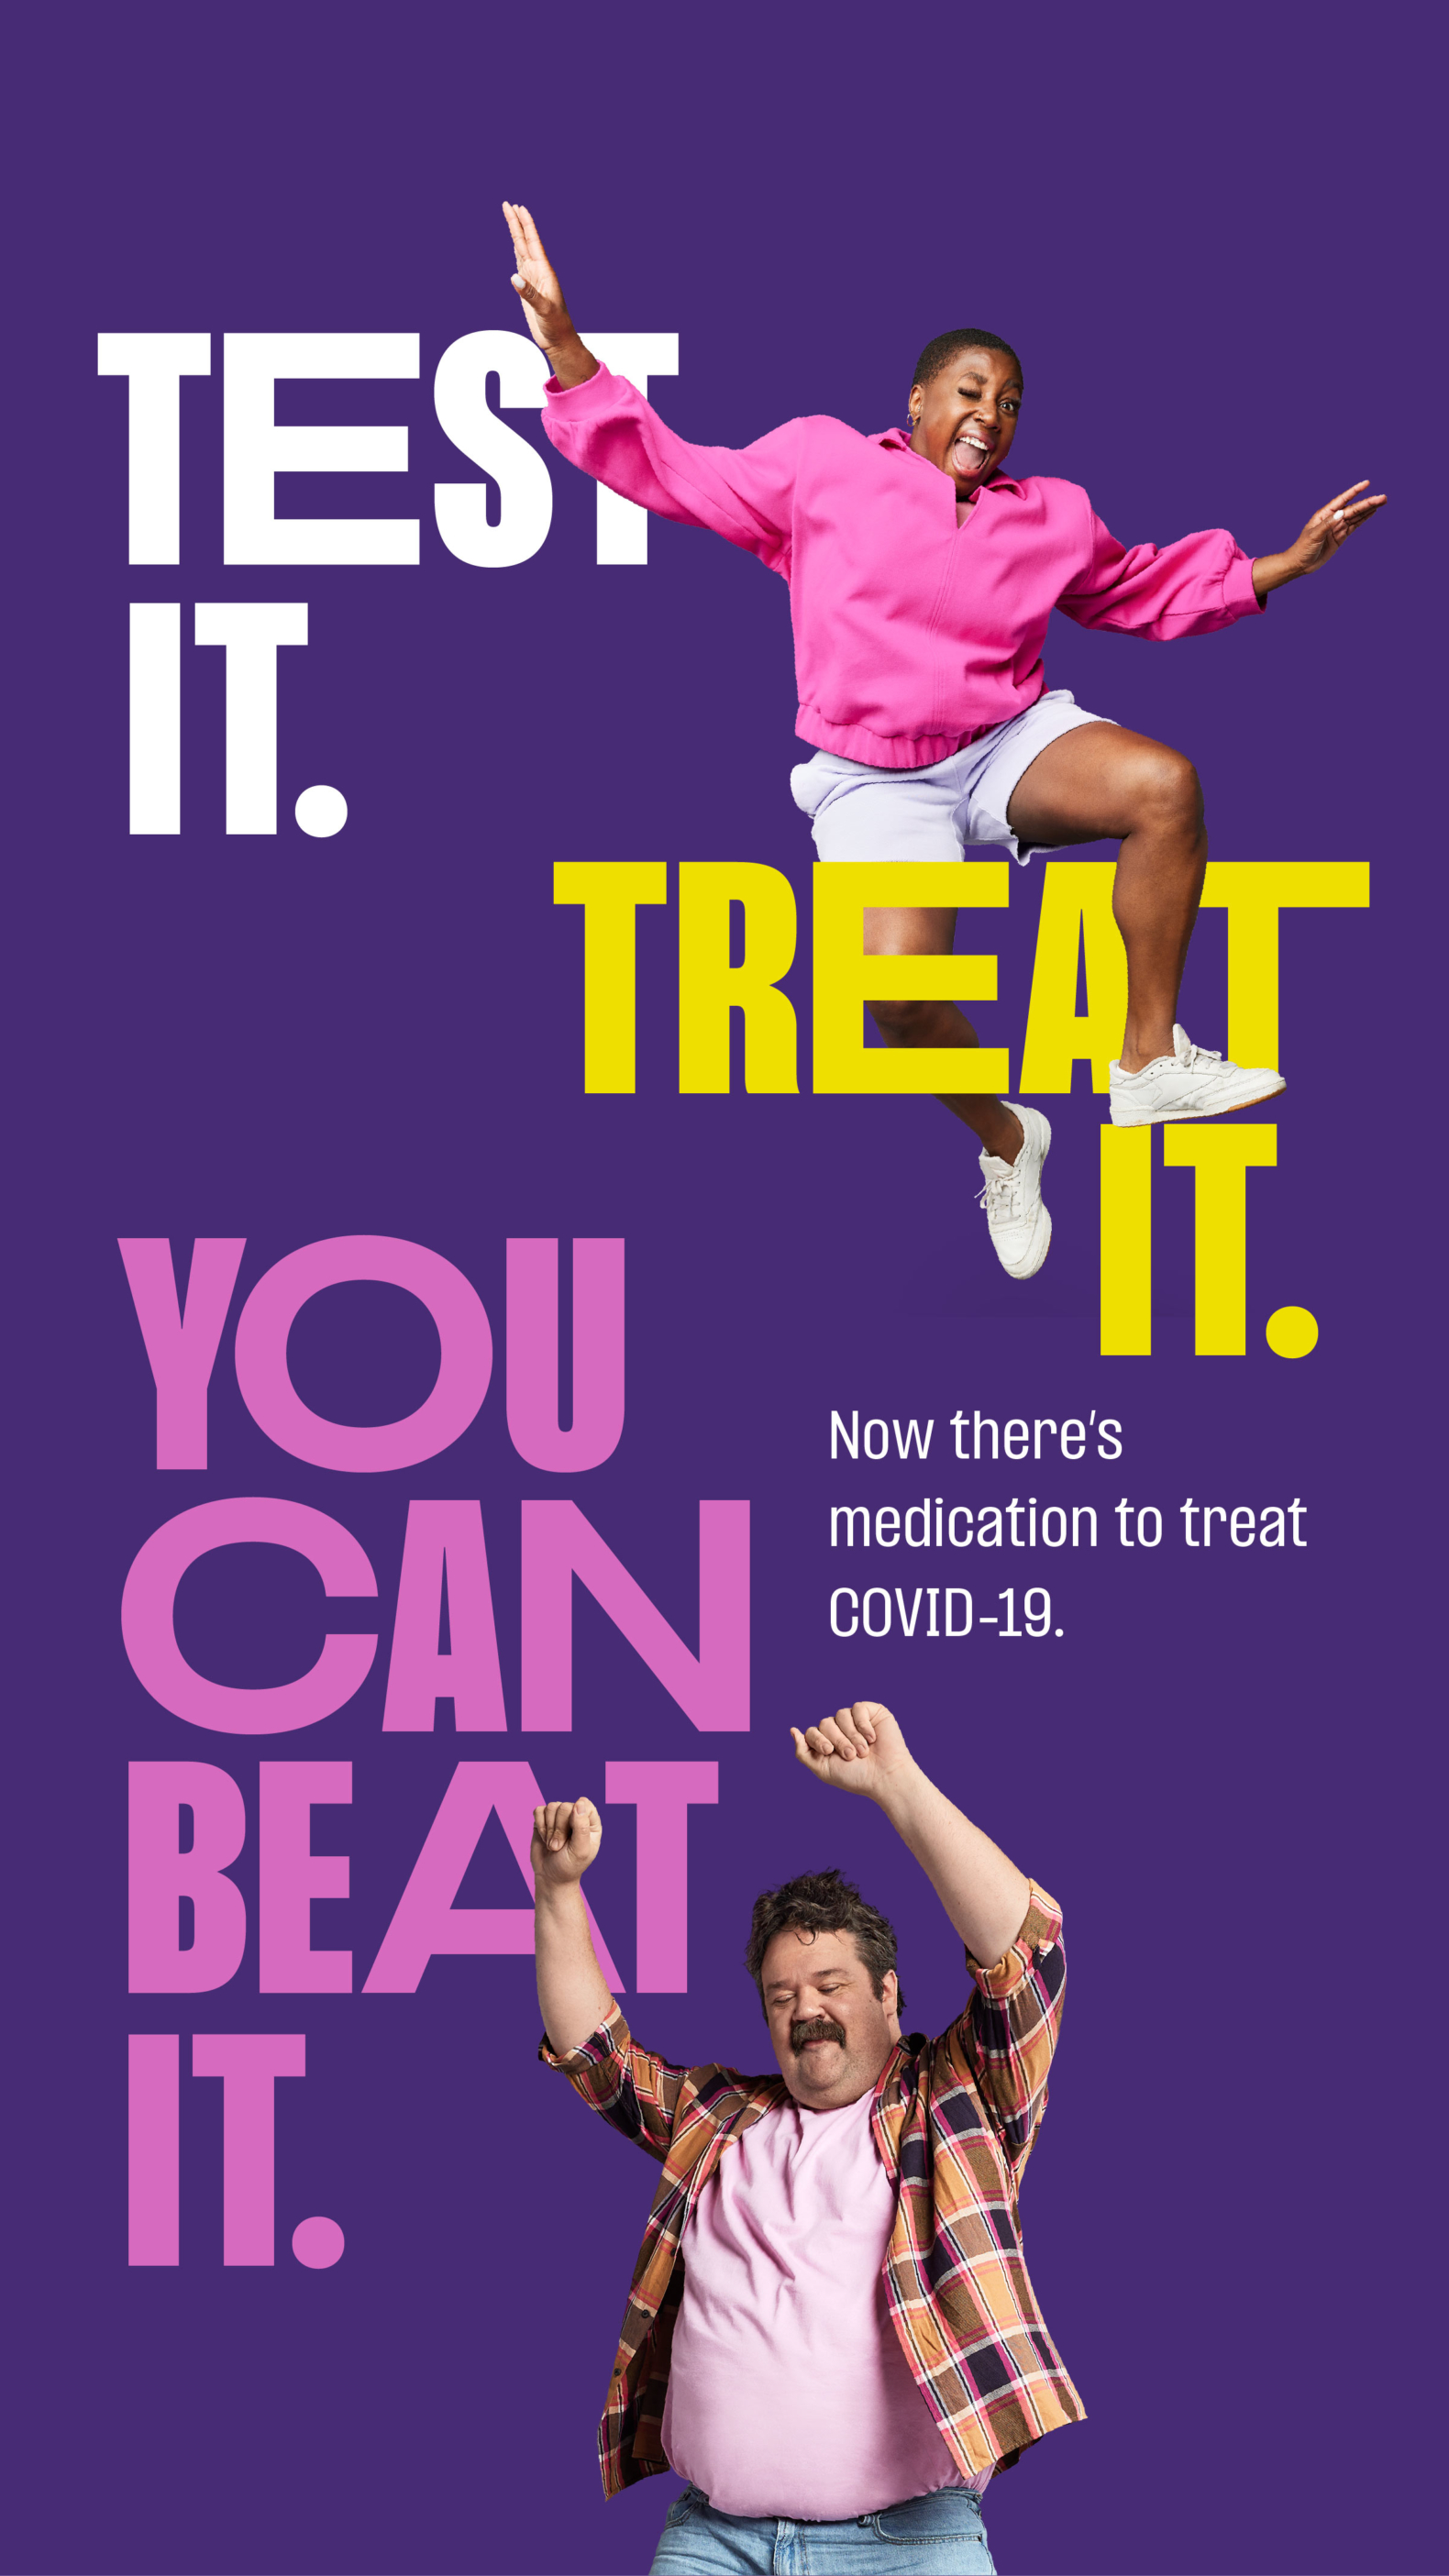 Ad with dark purple background. In the top left corner is bold, white type reading, “Test it.” On the right side, middle, is bold yellow type reading, “Treat it.” There is a dancing woman imposed directly on top of the type, she is wearing a bright pink jumper and white shorts. In the bottom left corner, bright pink, bold type reads, “You can beat it.” There is a man with a mustache and plaid shirt dancing with arms raised next to the bold copy. Overall, it reads, “Test it. Treat it. You can beat it.” Followed by small white type reading, “Now there’s medication to treat COVID-19.” It is placed directly under the yellow “Treat it.” copy. 